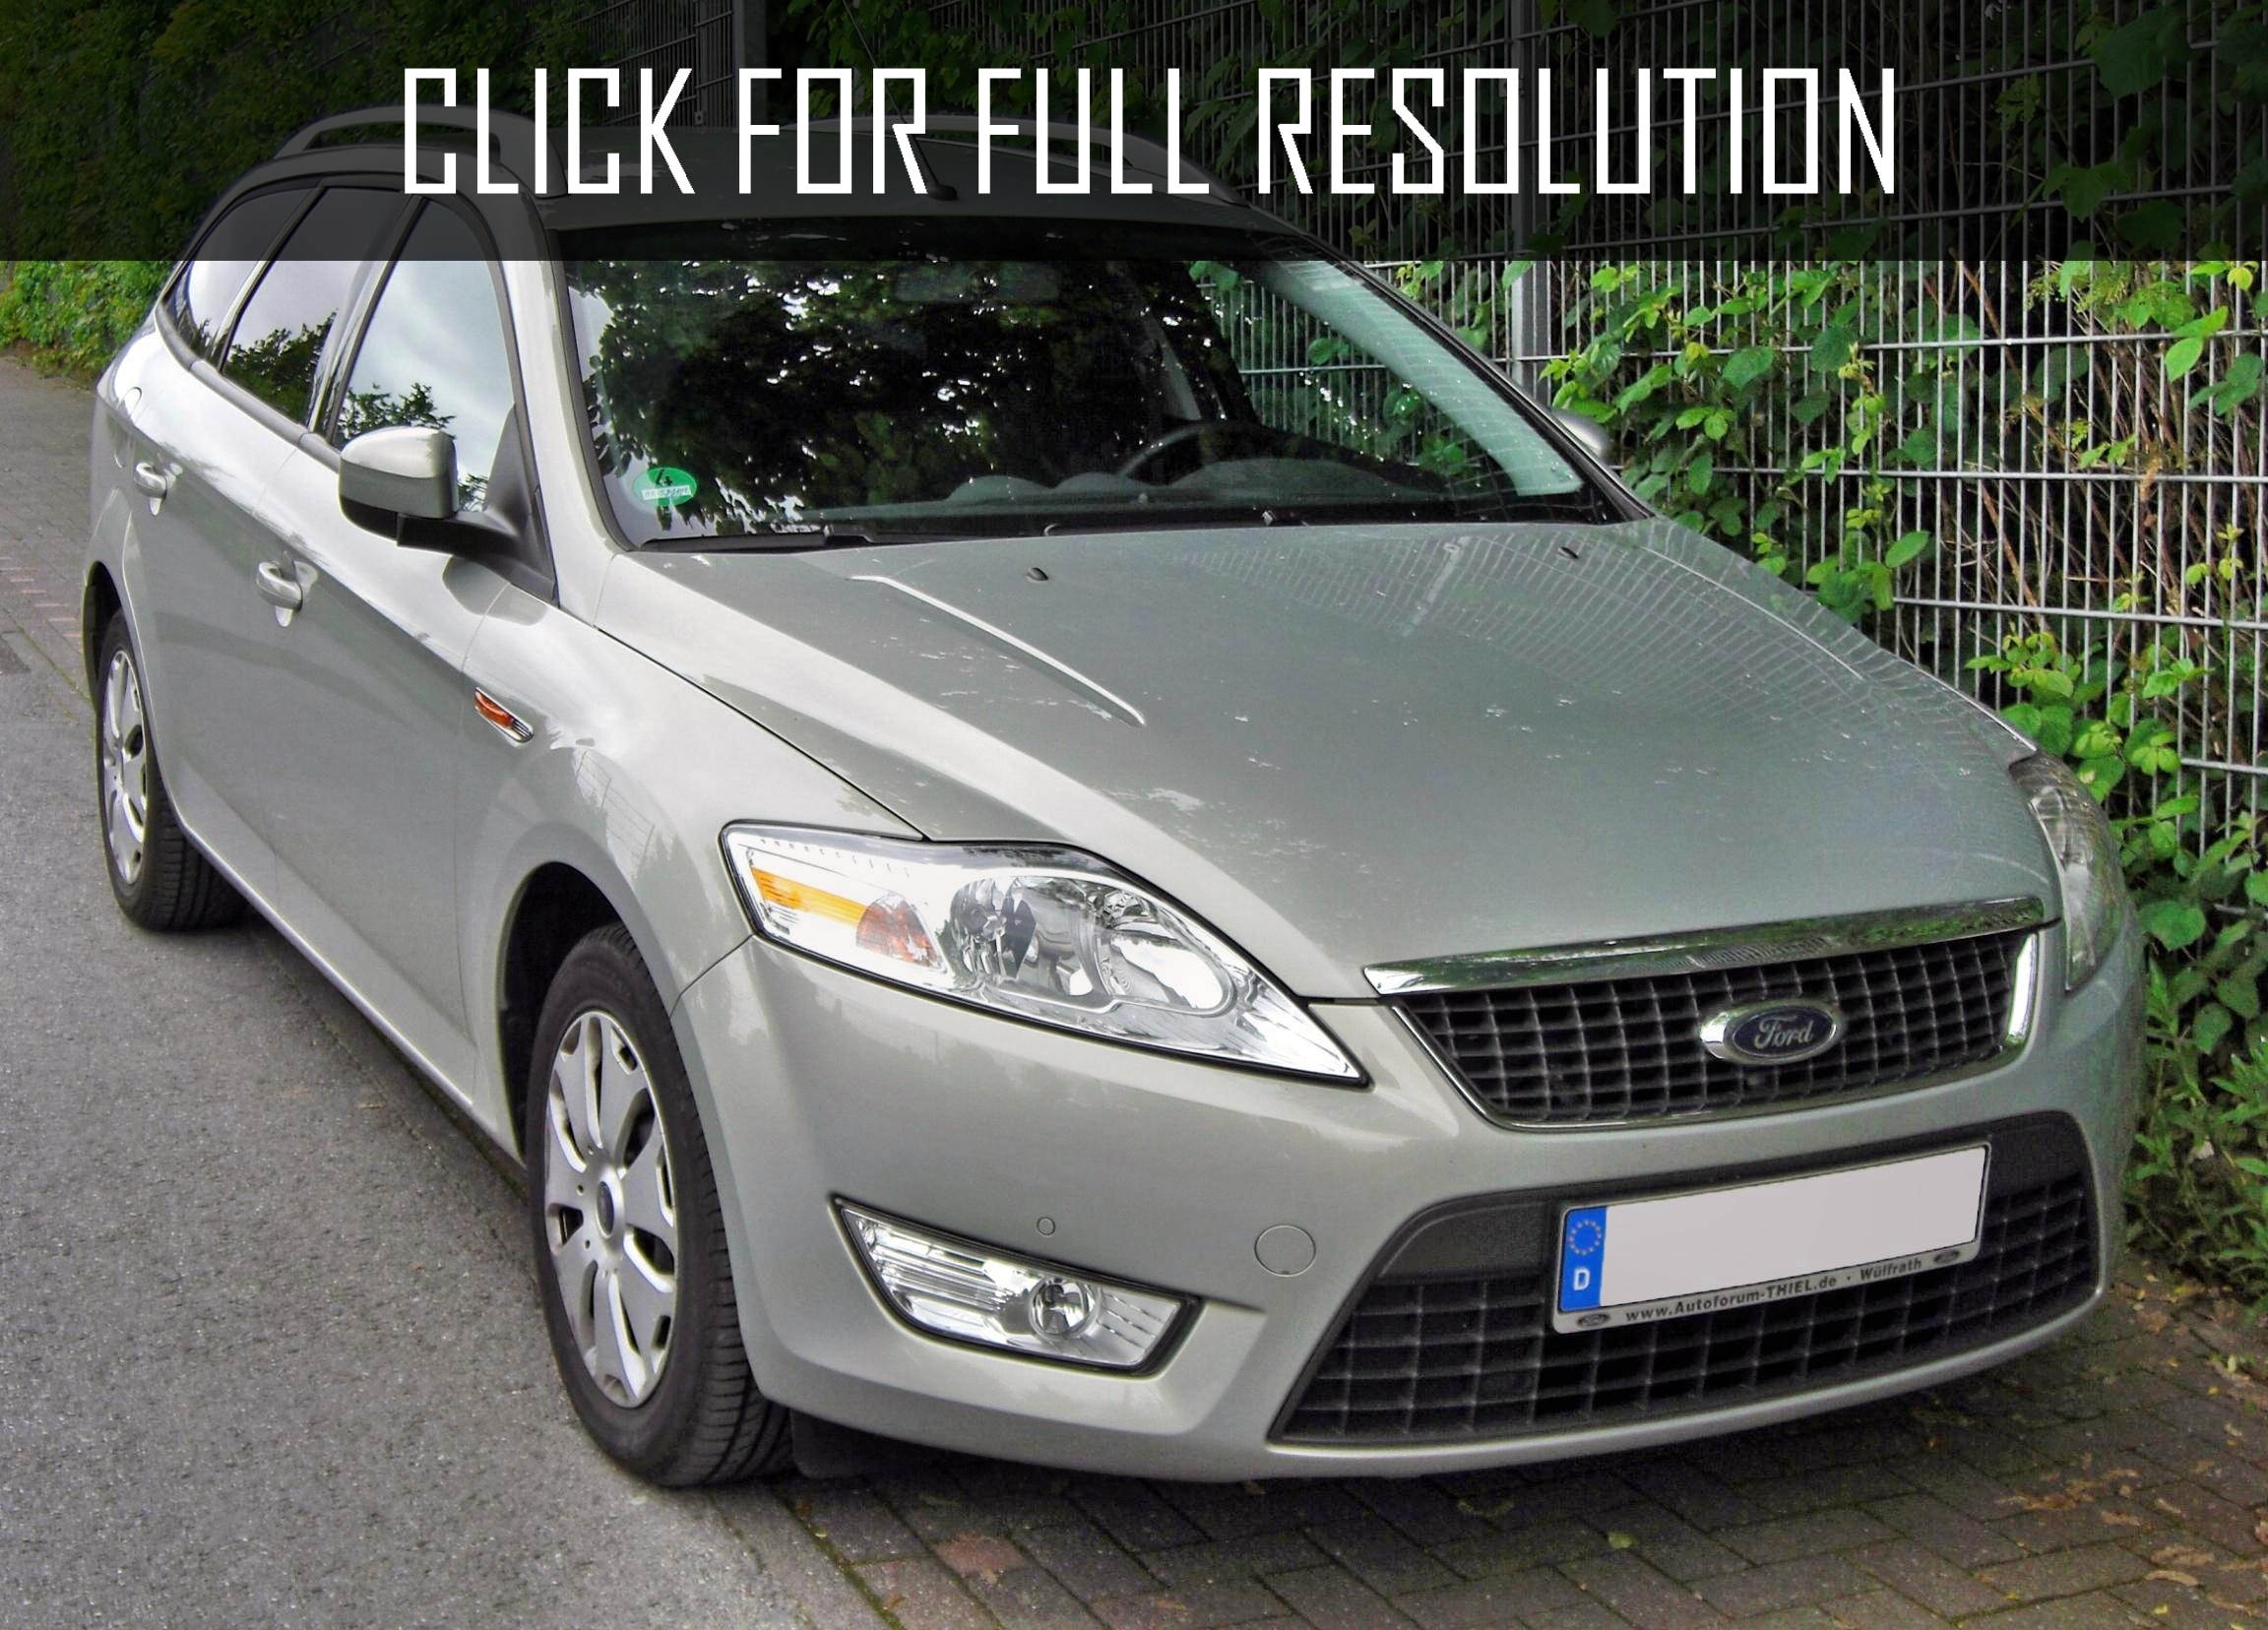 2009 Mondeo image gallery #9/14 - share and download